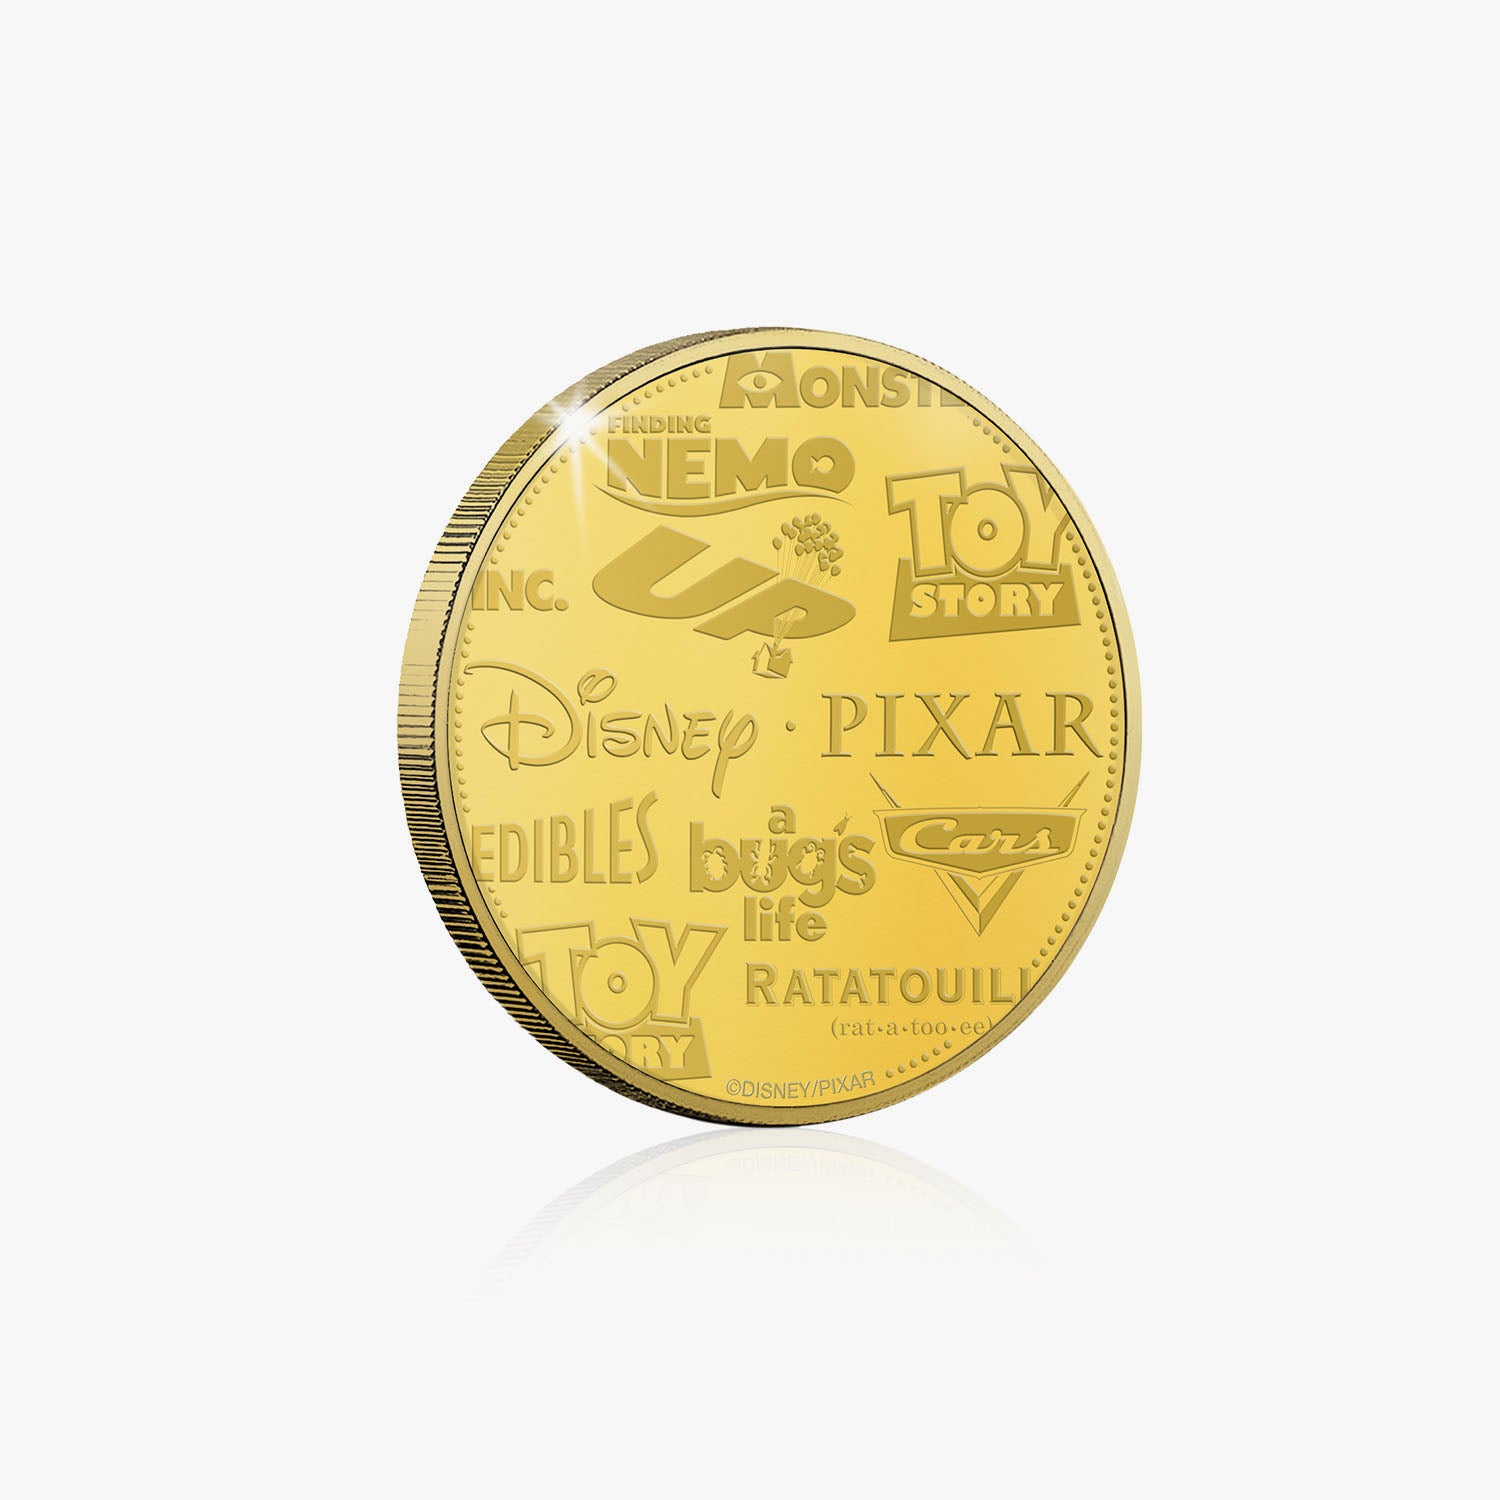 Toy Story Gold-Plated Commemorative